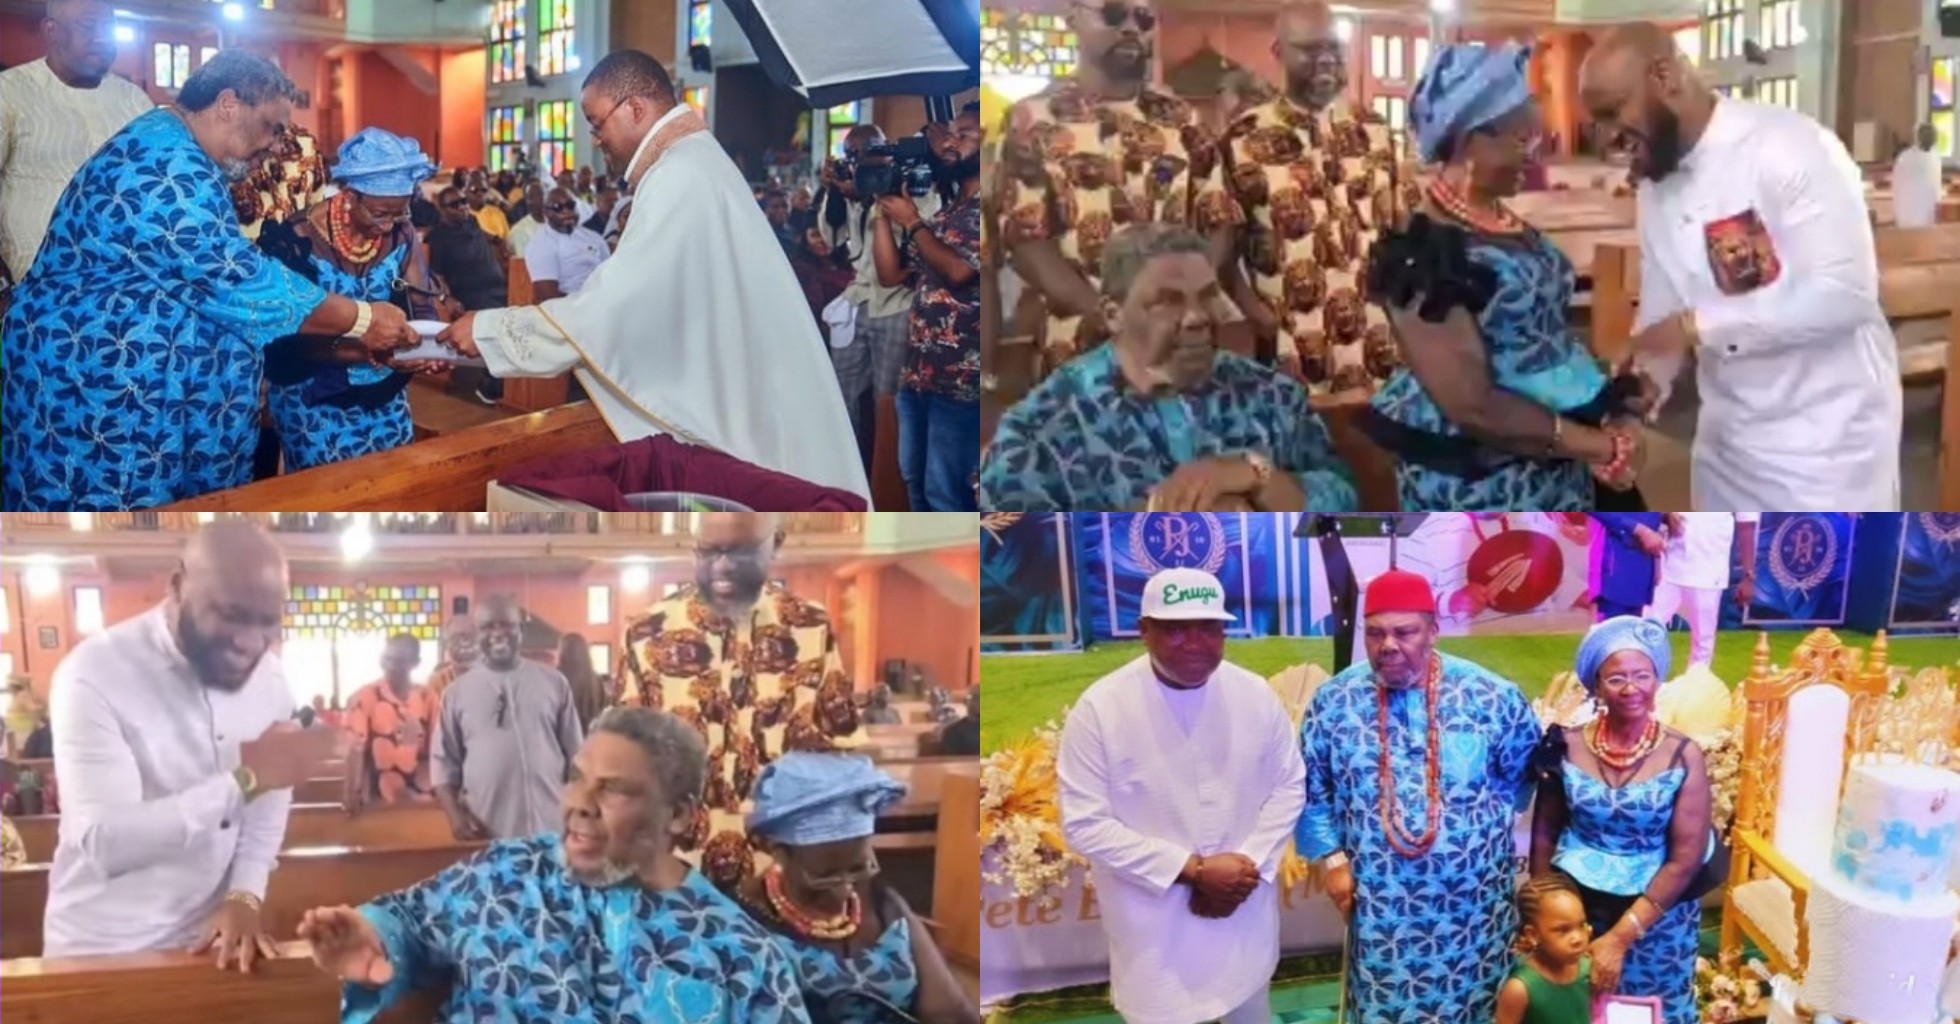 More videos and photos from Pete Edochie and wife's 53rd wedding anniversary celebration in Enugu